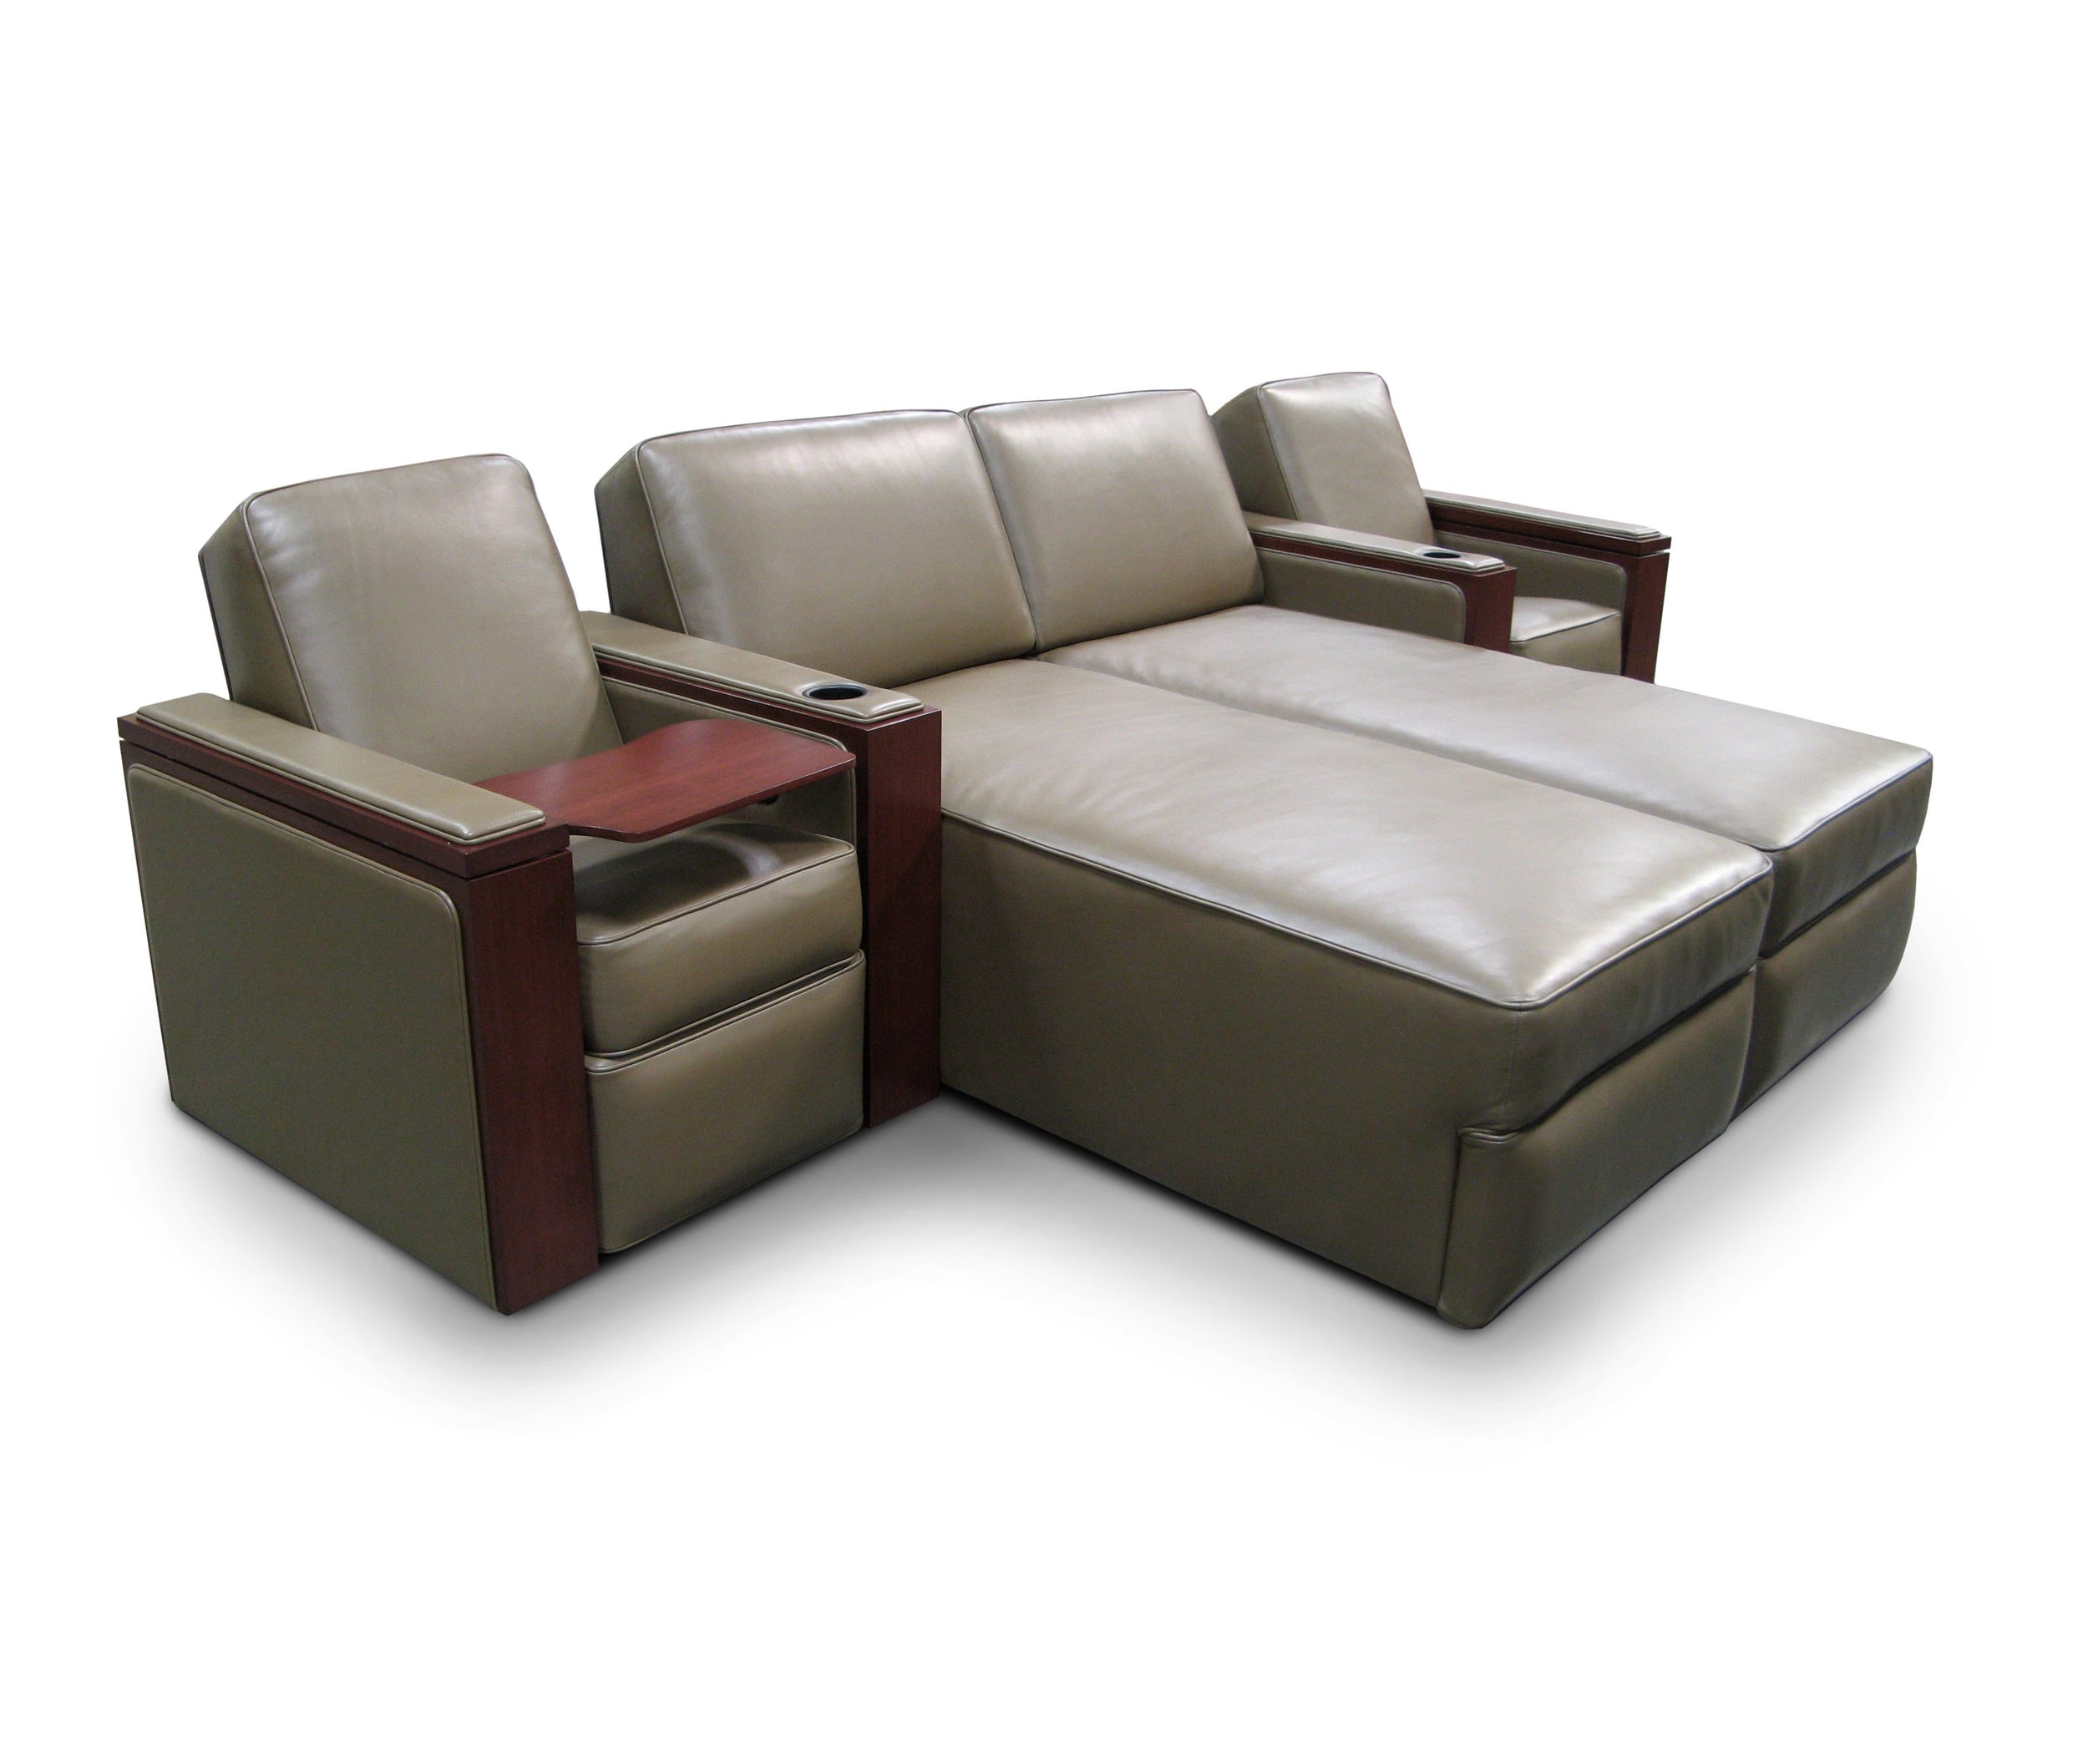   Concealed &amp; Motorized First Class Tray Tables; Pocket Arms; Model: Hudson Single-Dual Chaise-Single  